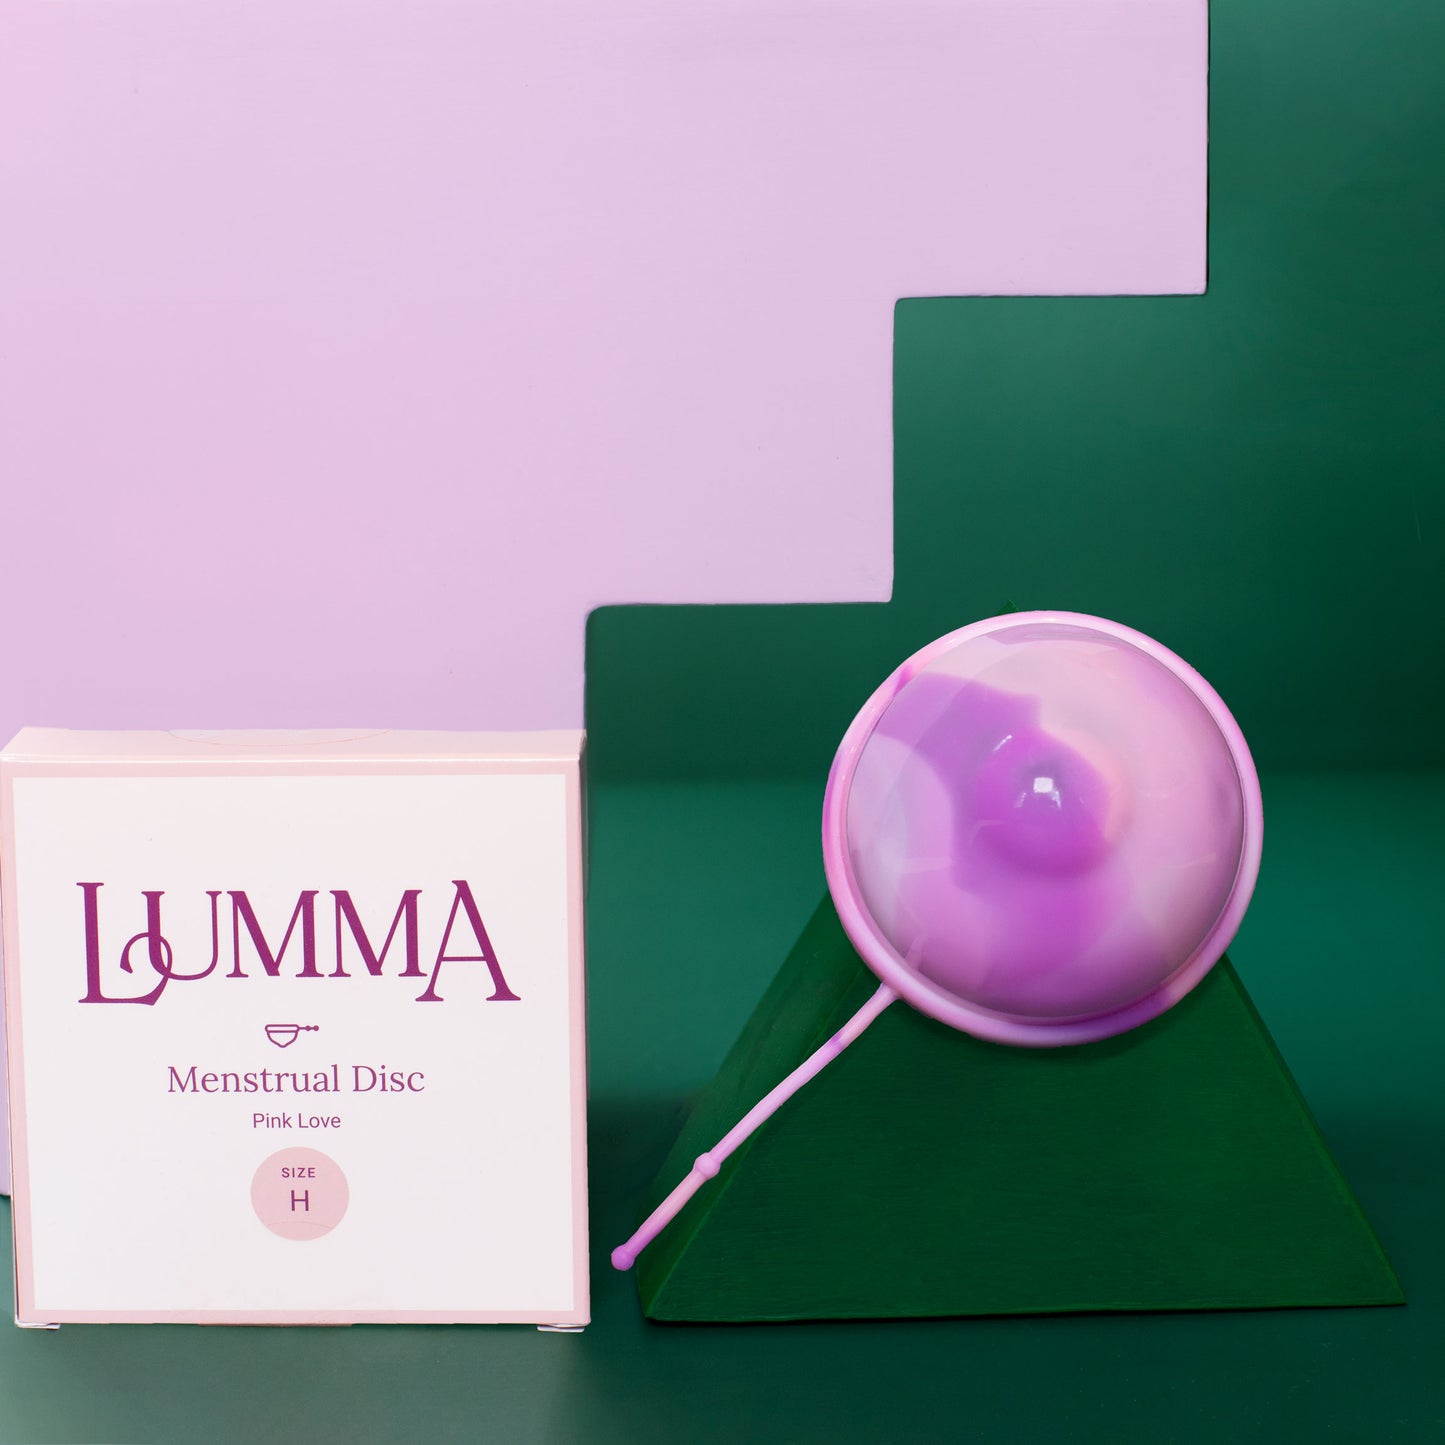 Lumma menstrual disc size large High in pink love with packaging